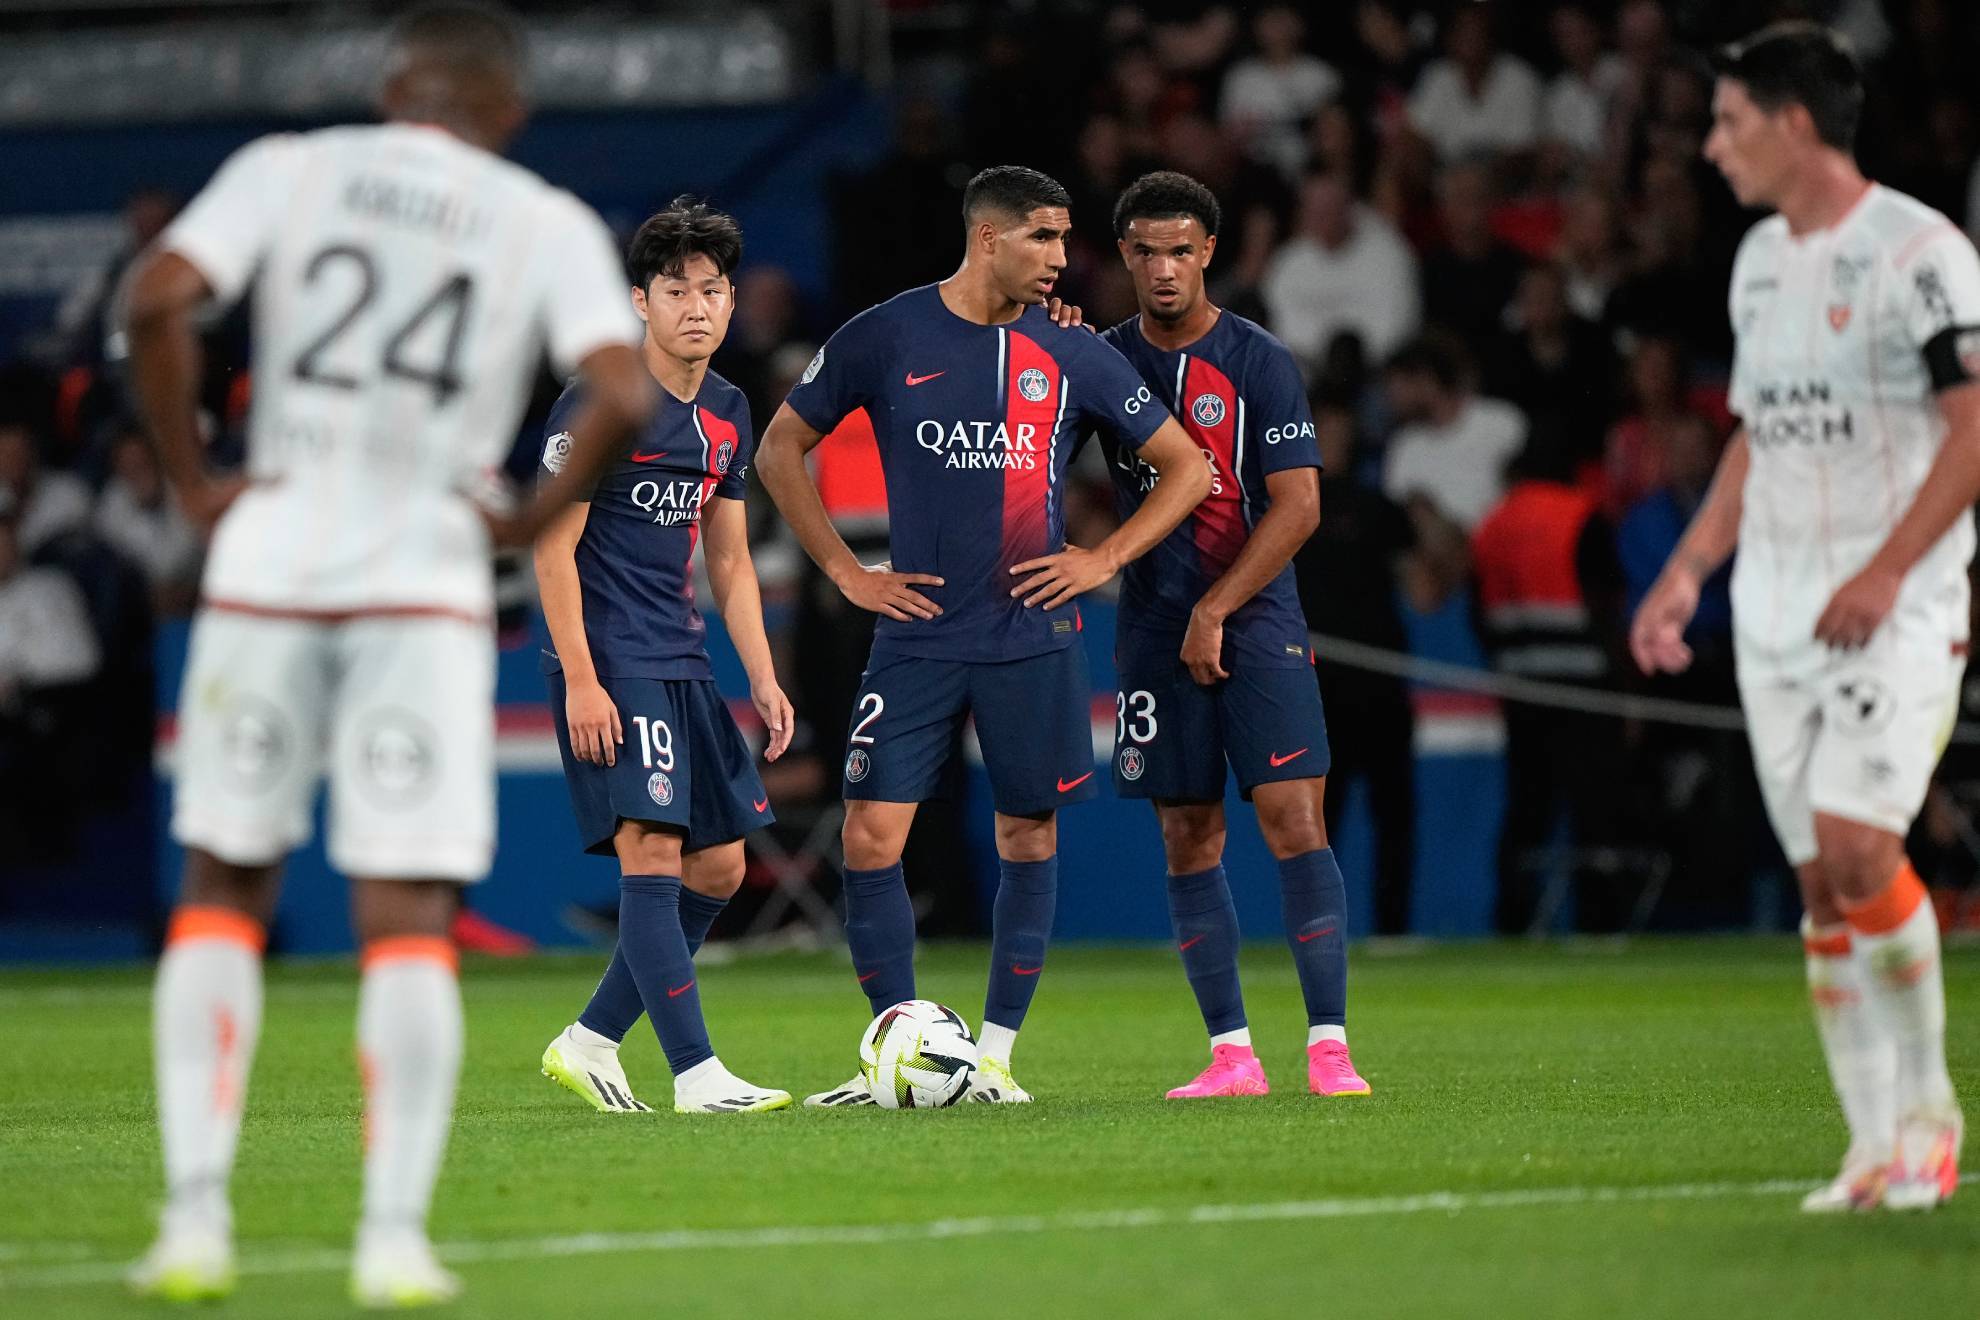 PSG draws 0-0 without Mbappe and other stars